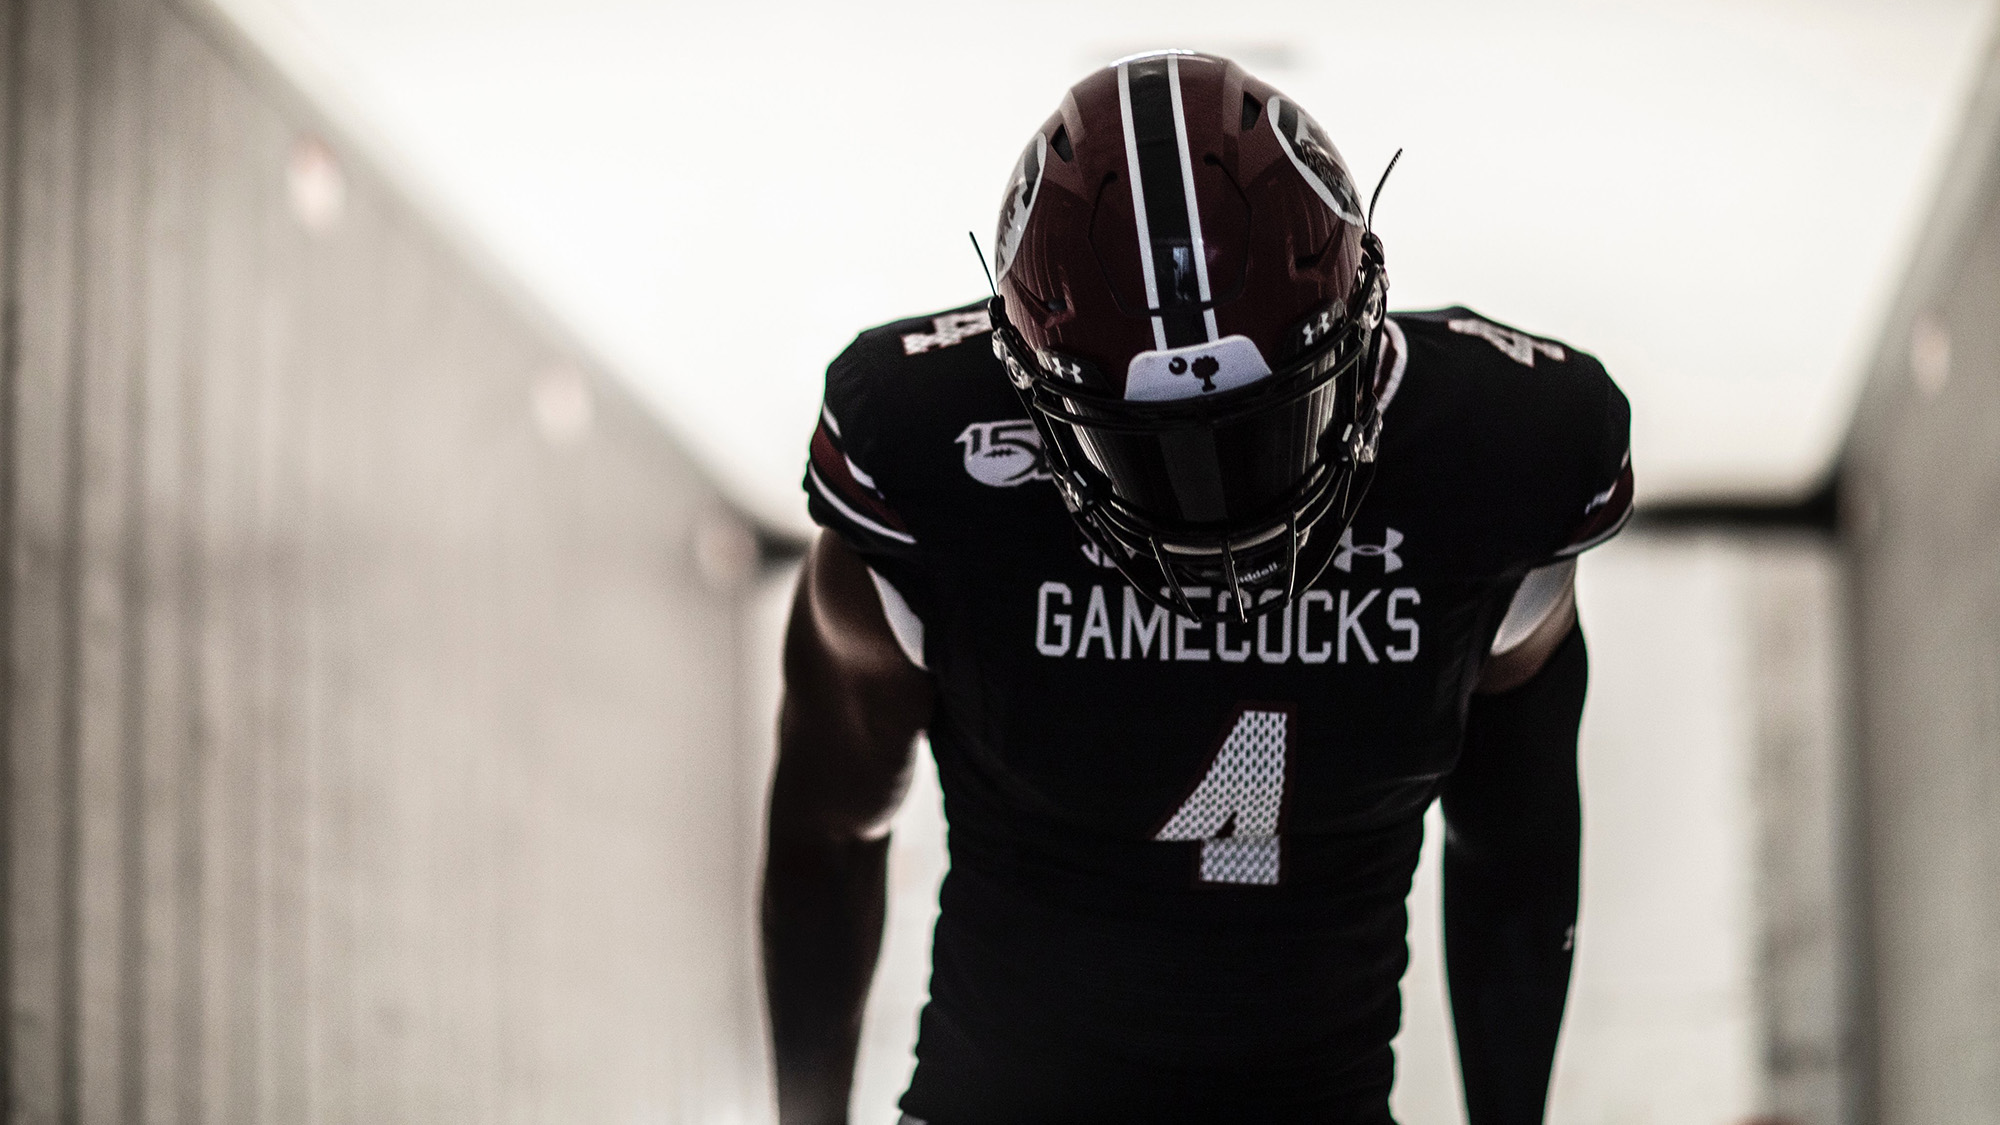 Gamecocks, Under Armour Reveal Heritage Uniform Collection